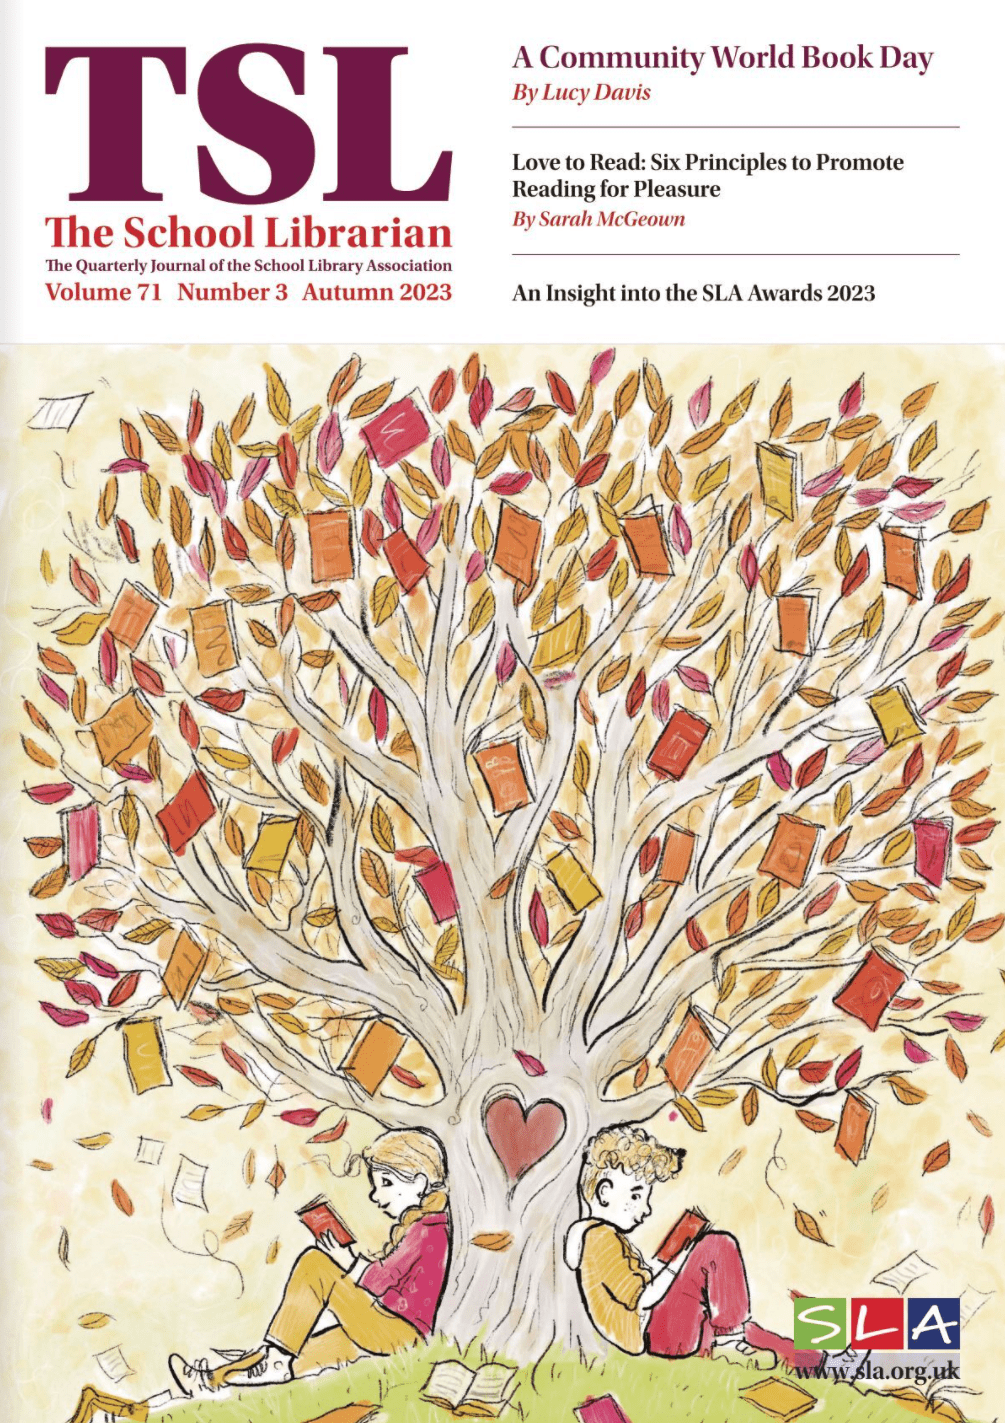 Article | The School Librarian Newsroom